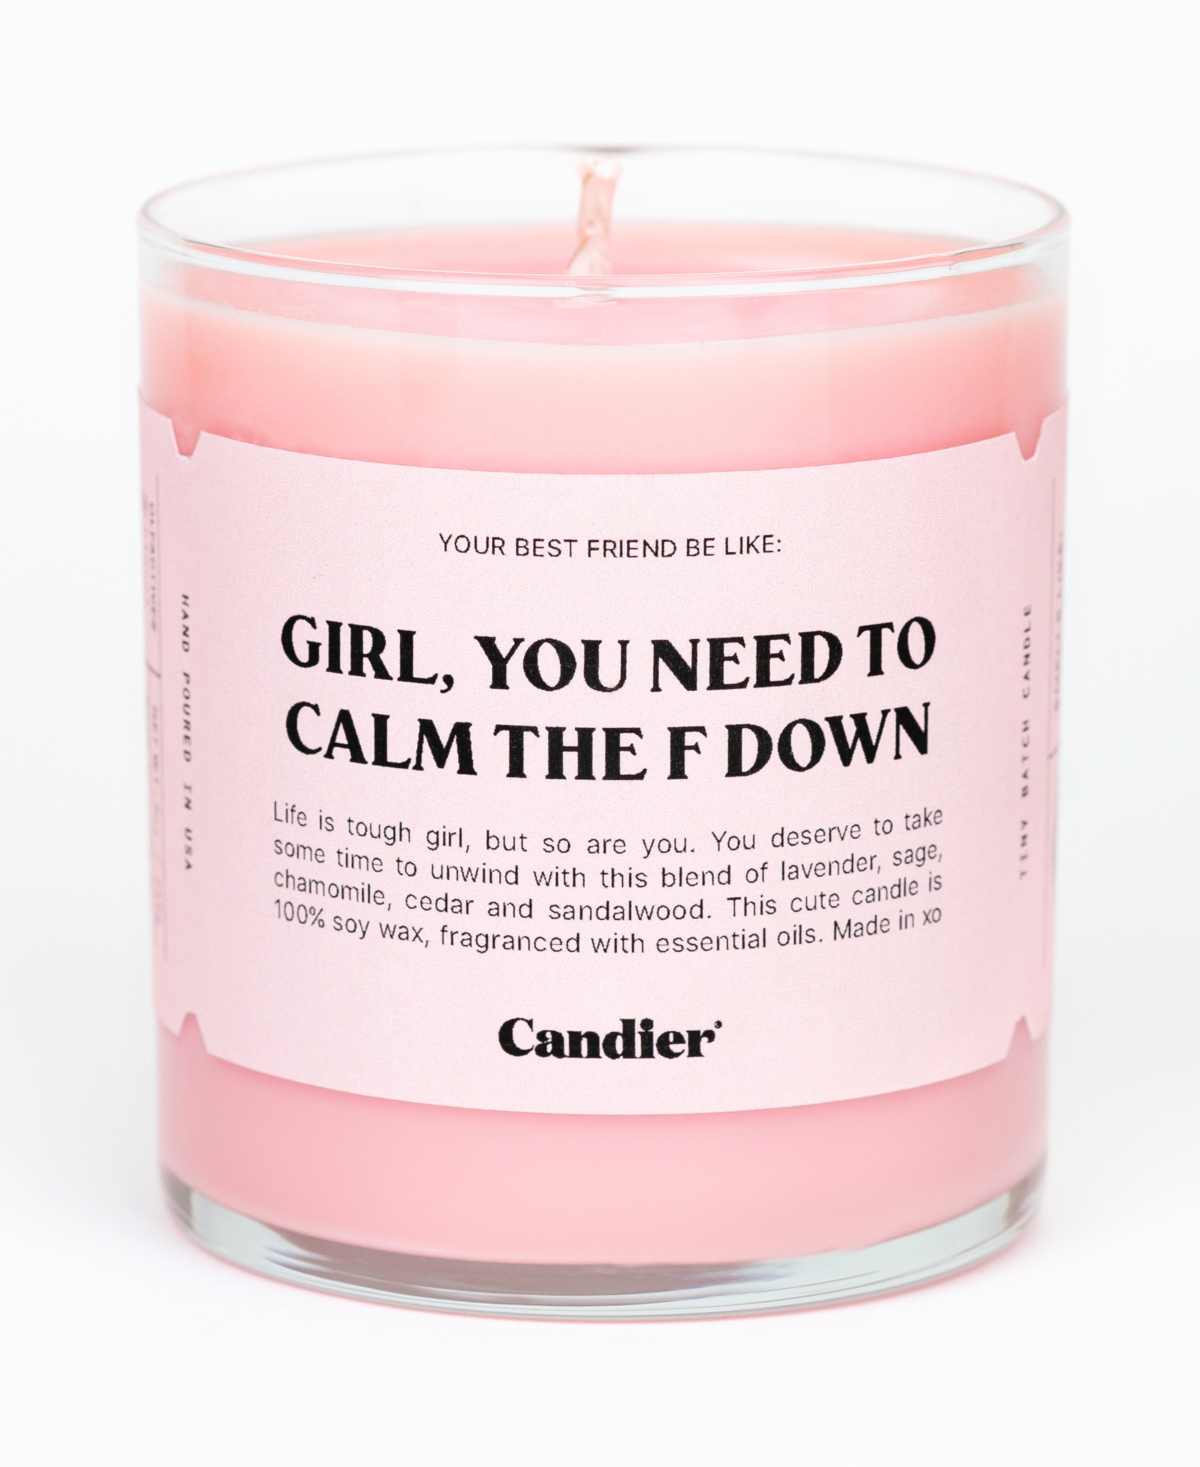 Calm Down Votive Candle, 9 oz - Clear Votive with Pink Wax